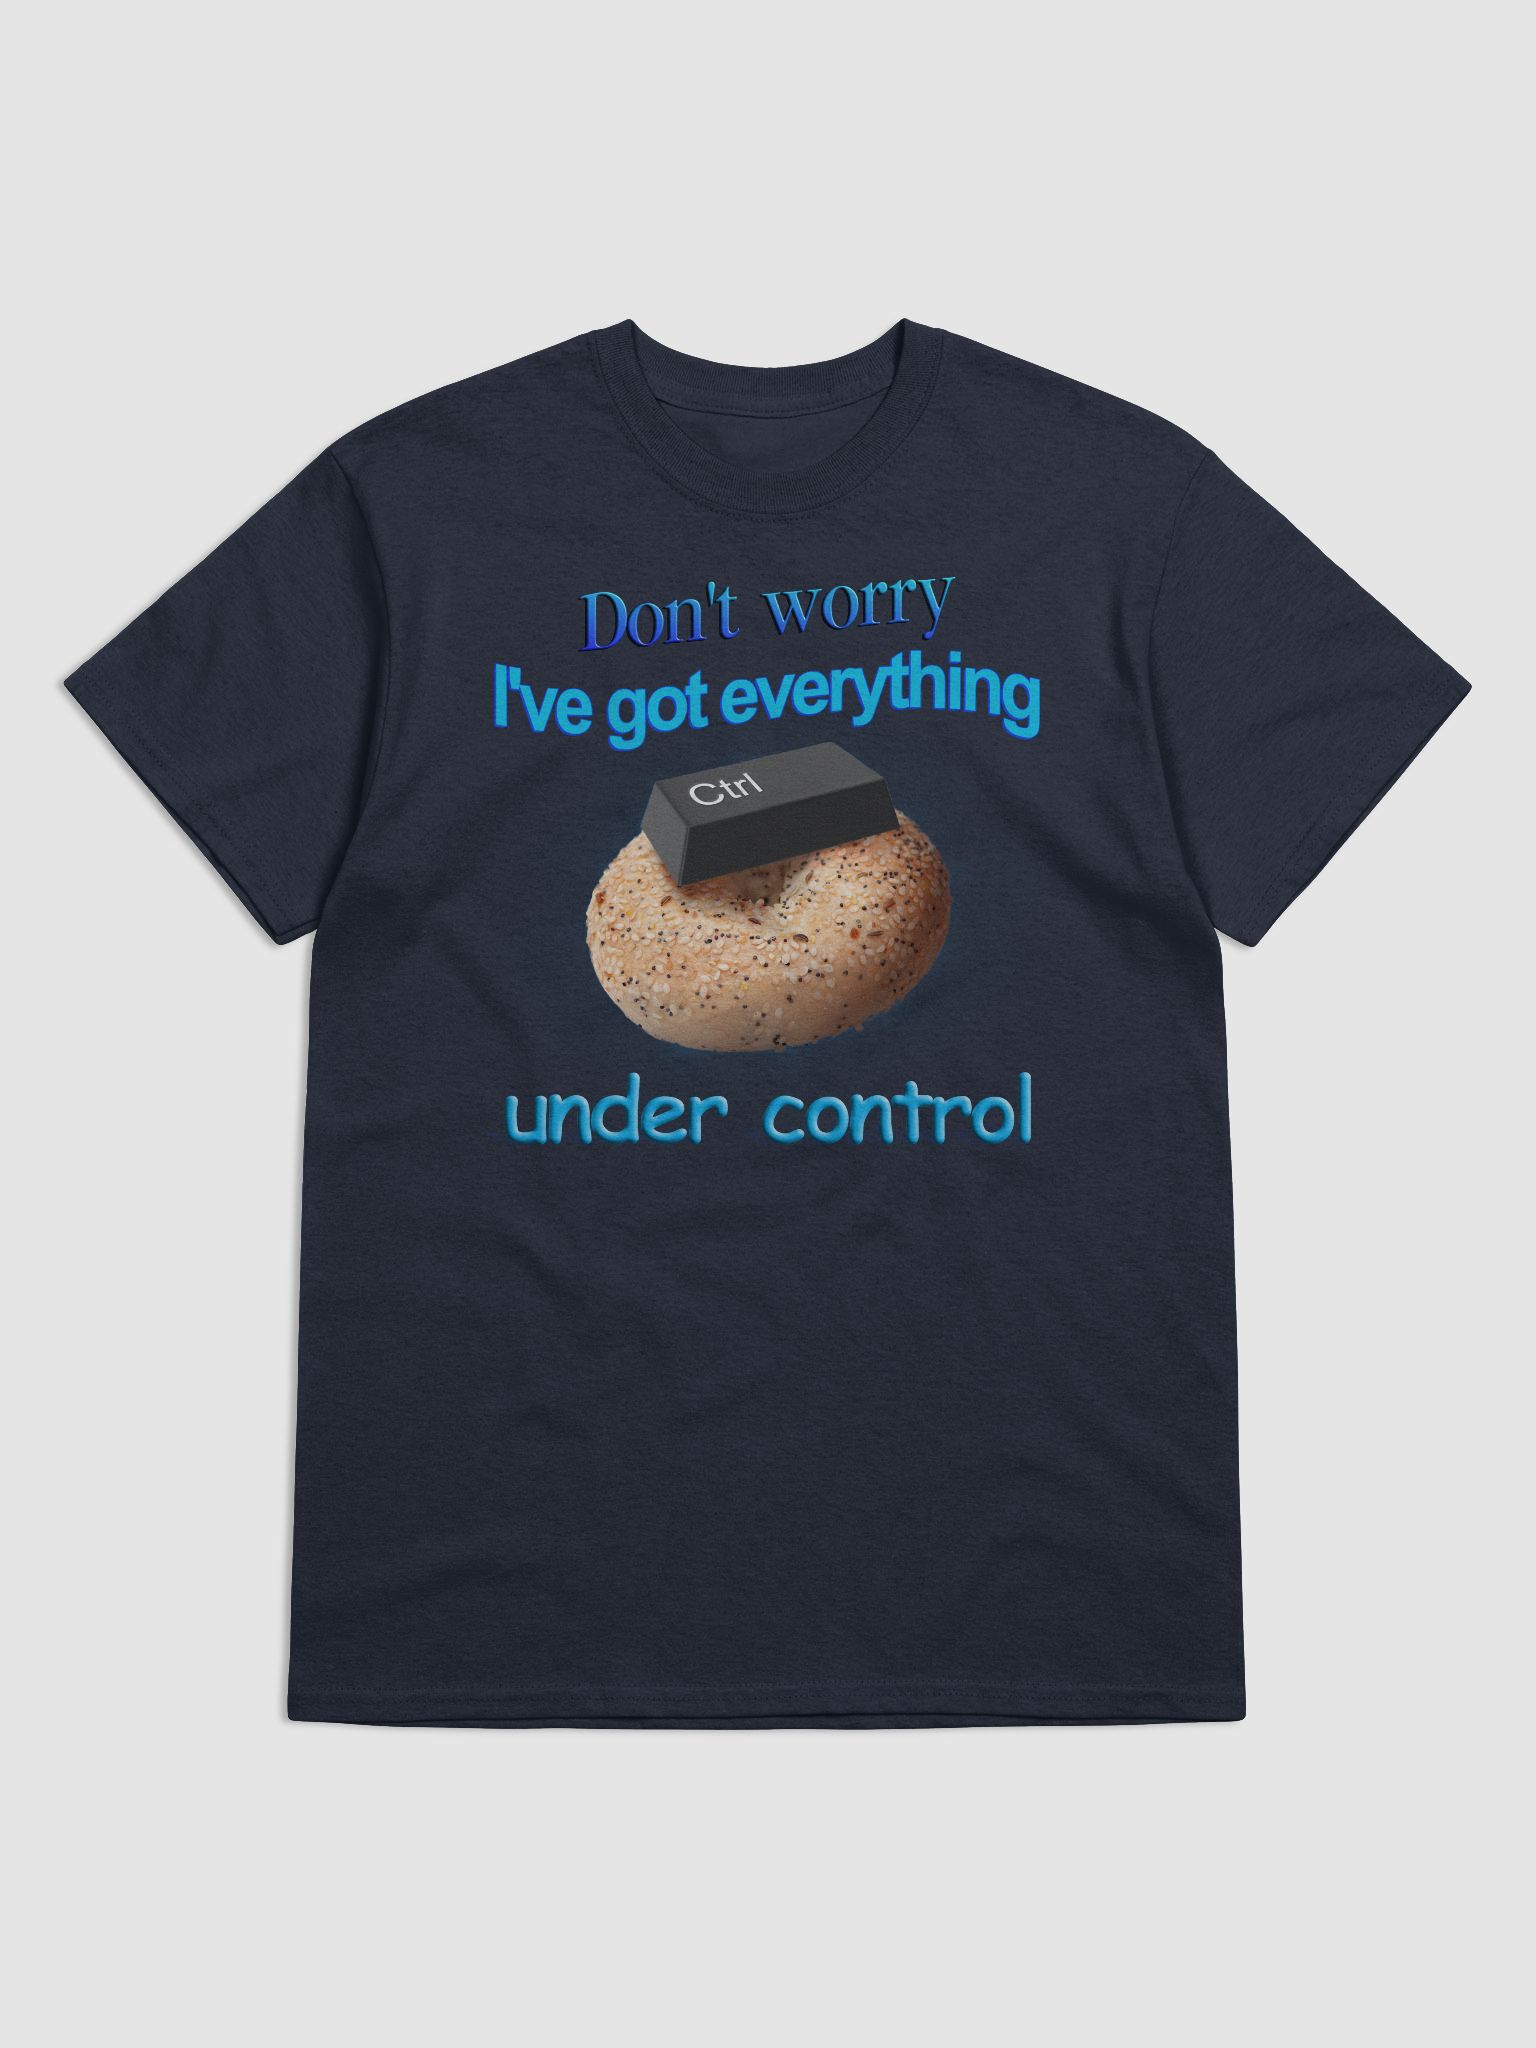 Everything is under control Men's T-Shirt